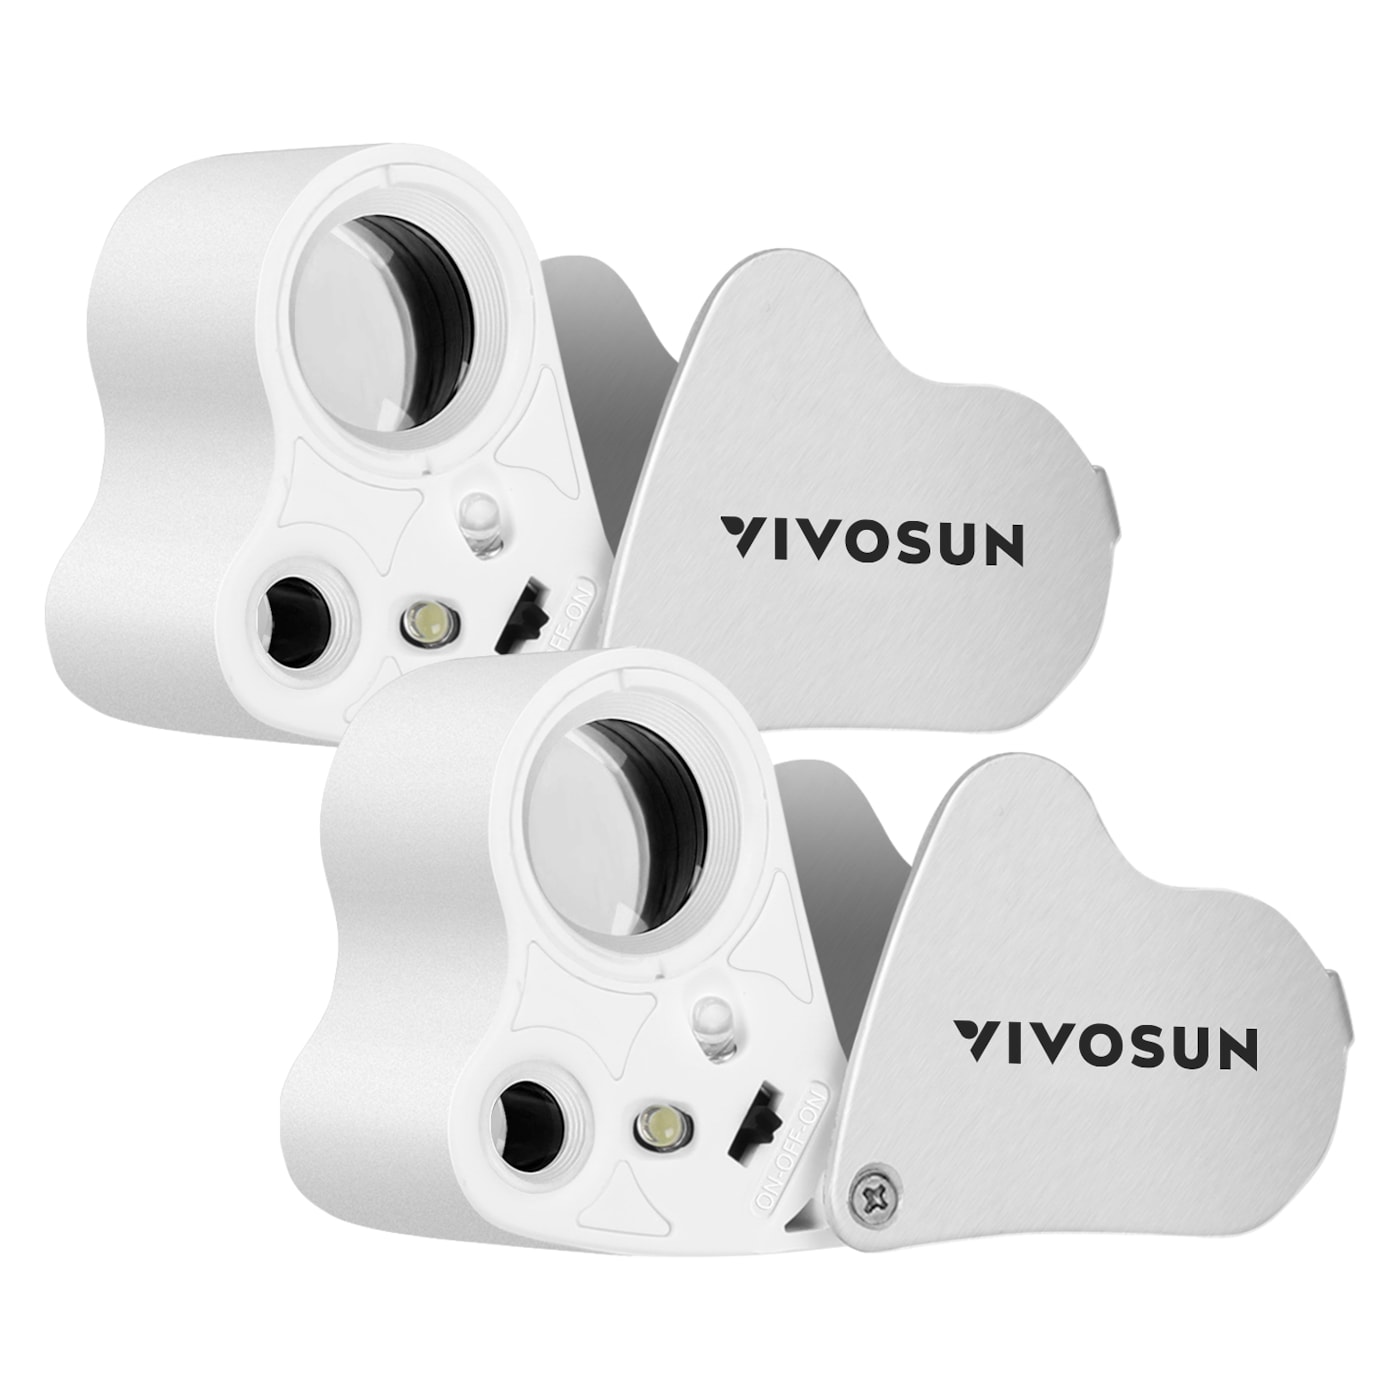 VIVOSUN 30X-60X Jewelers Loupe Magnifier with LED Light (2-Pack White)